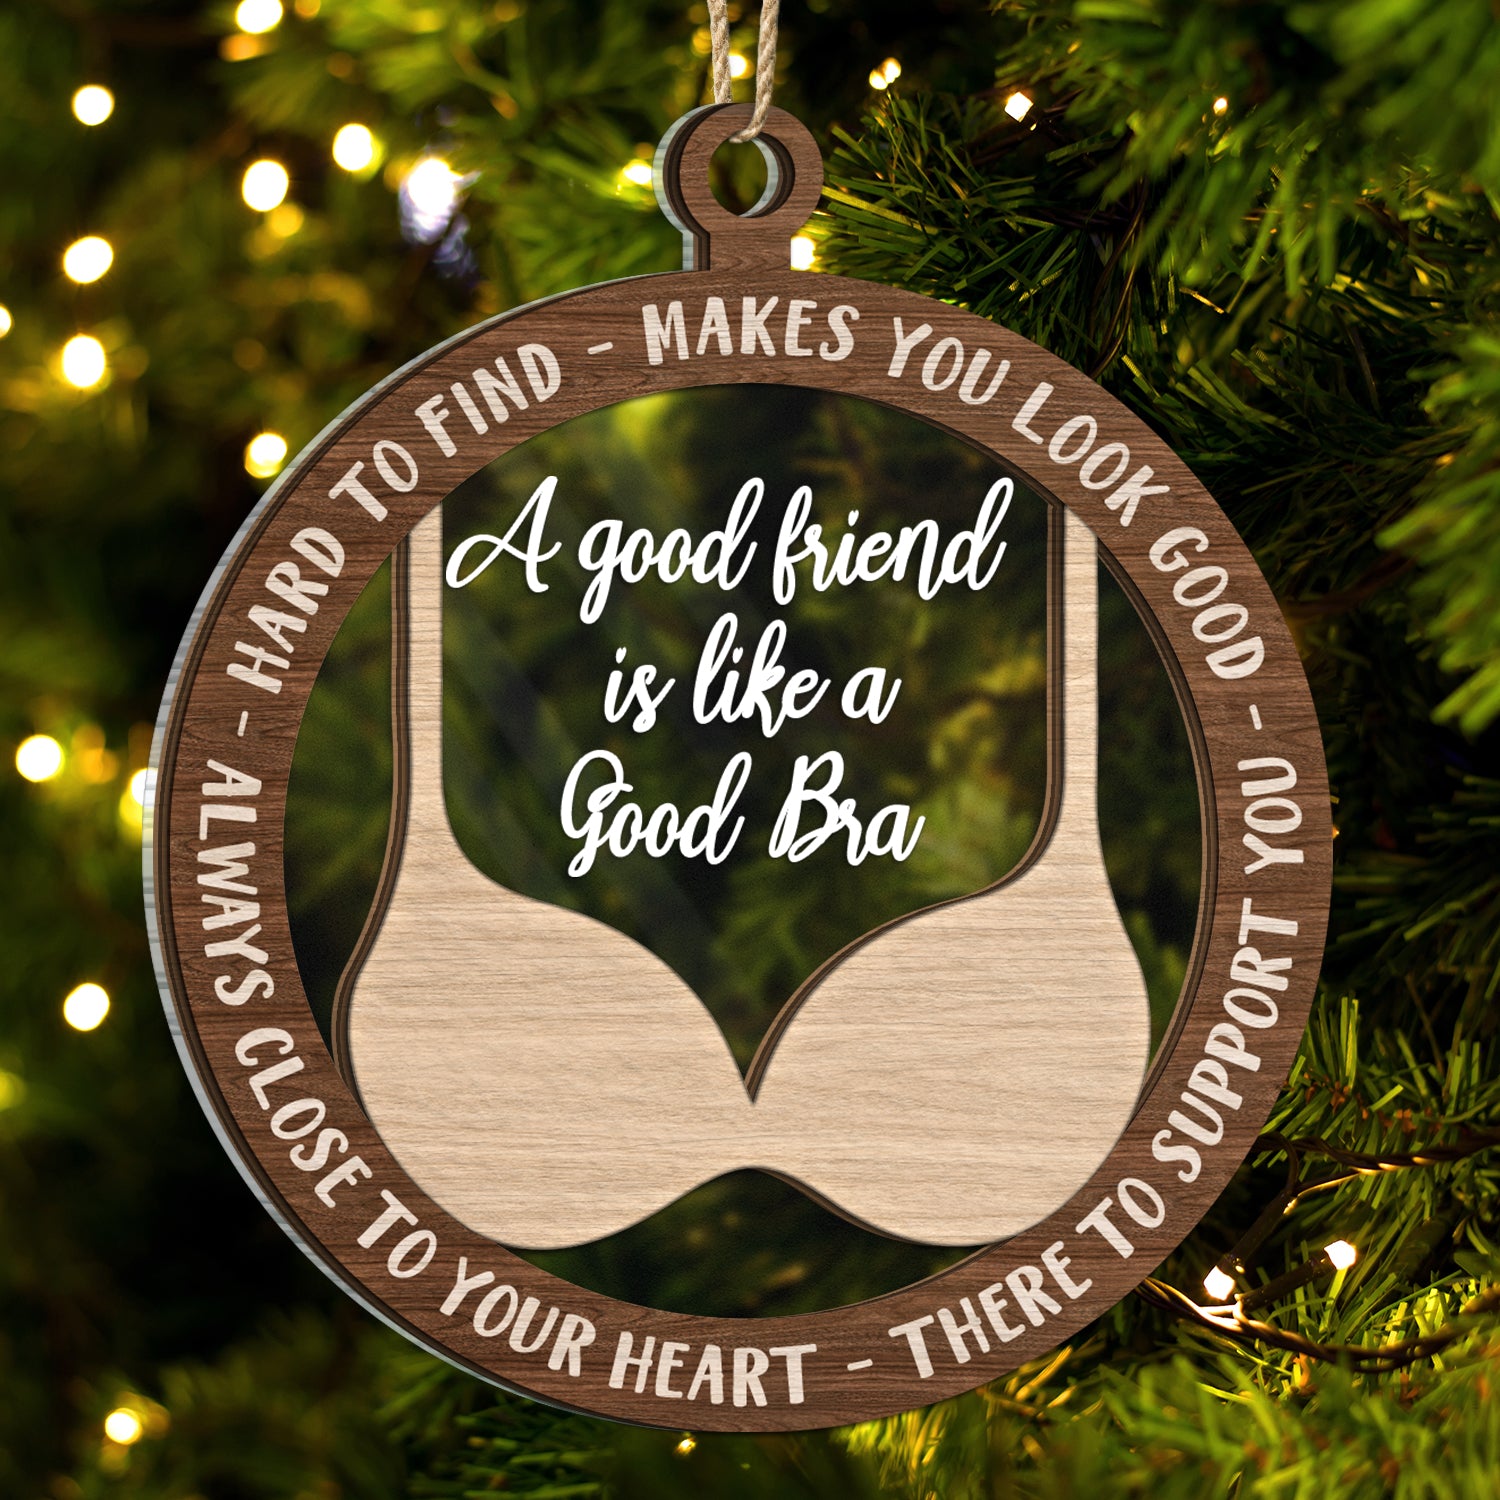 A Good Friend Is Like A Good Bra - Christmas Gifts For Best